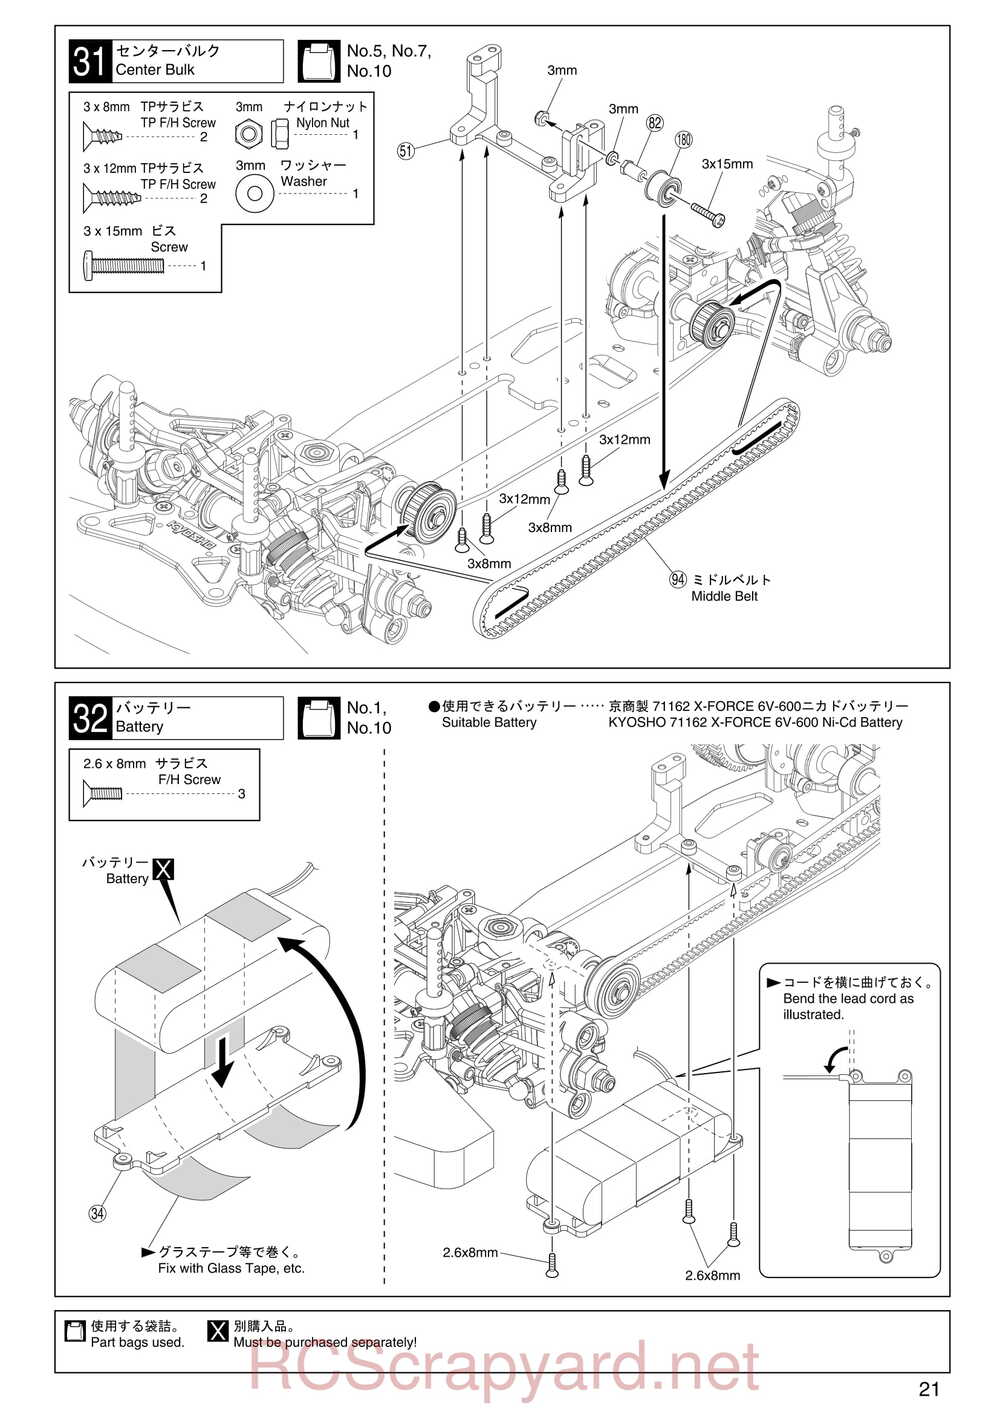 Kyosho - 31257 - V-One RRR Rubber - Manual - Page 21